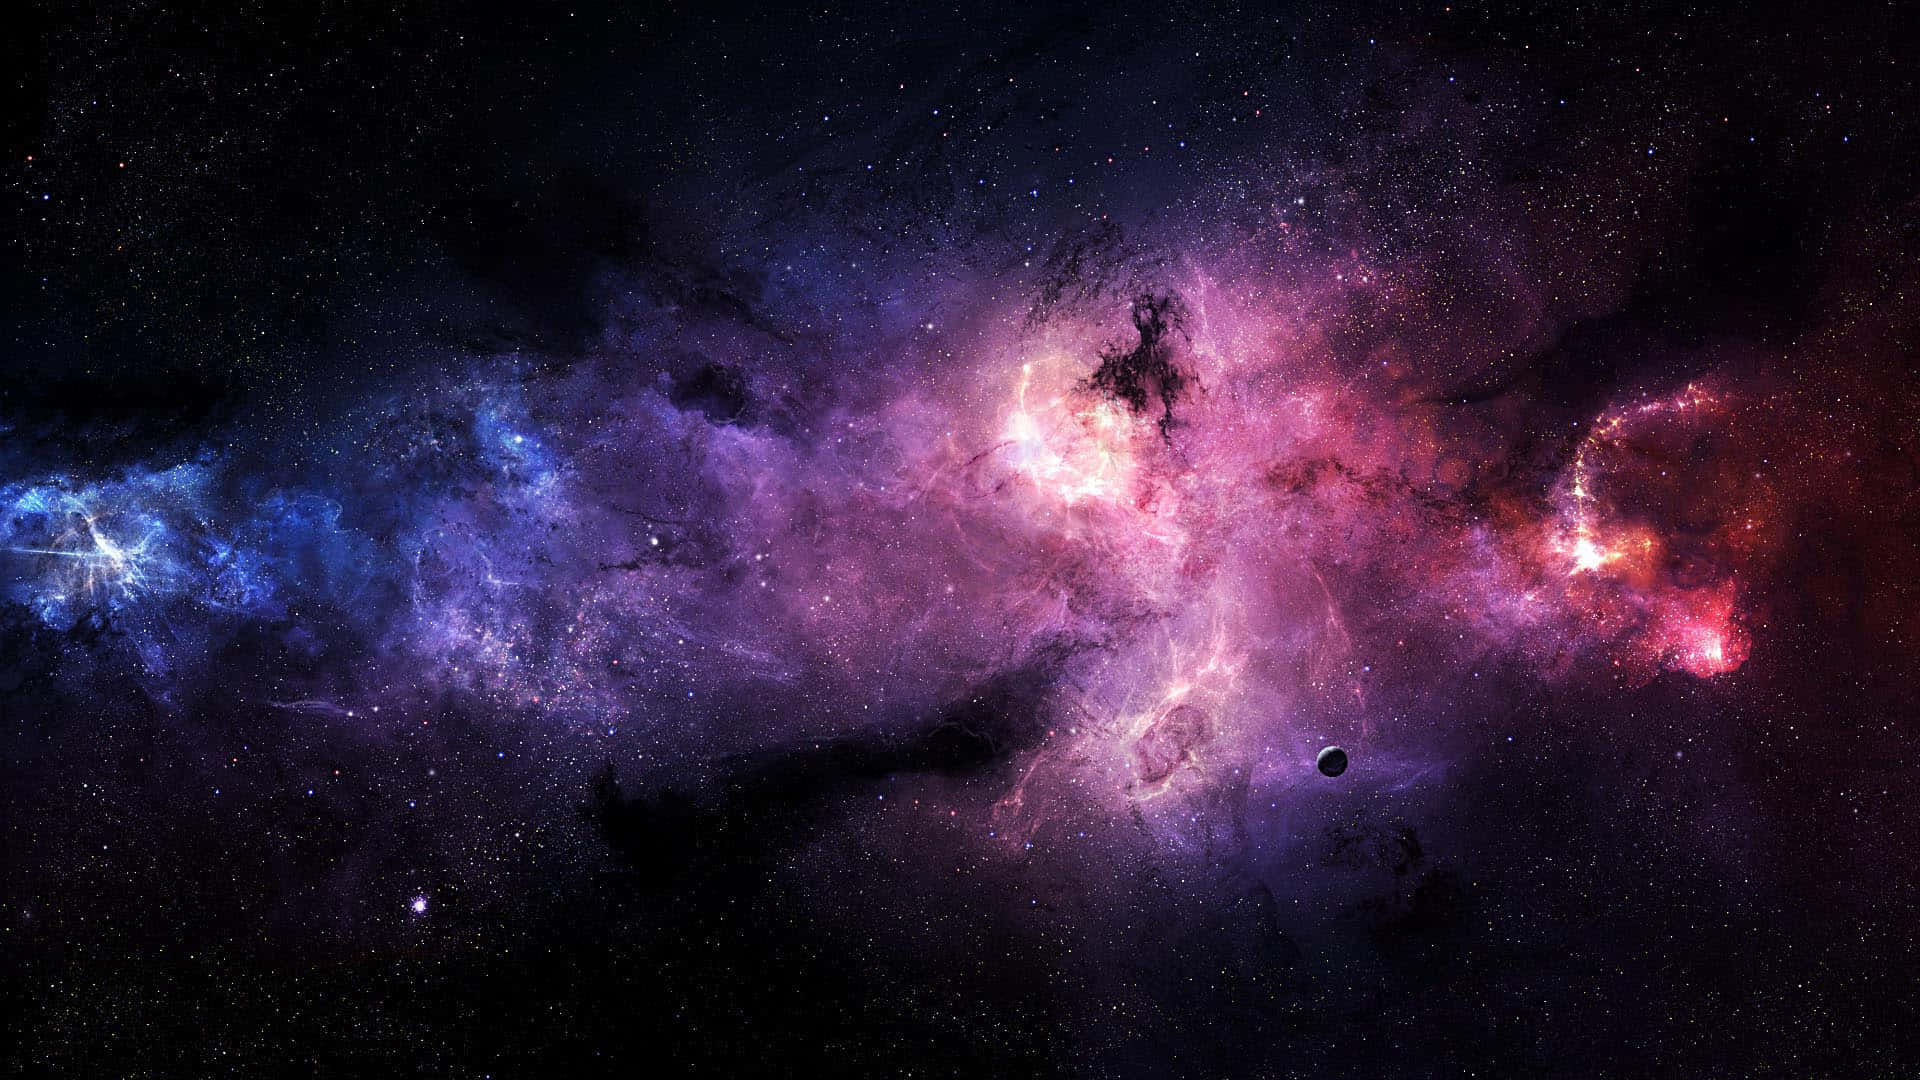 Explore the depths of the universe with a #purplespace background